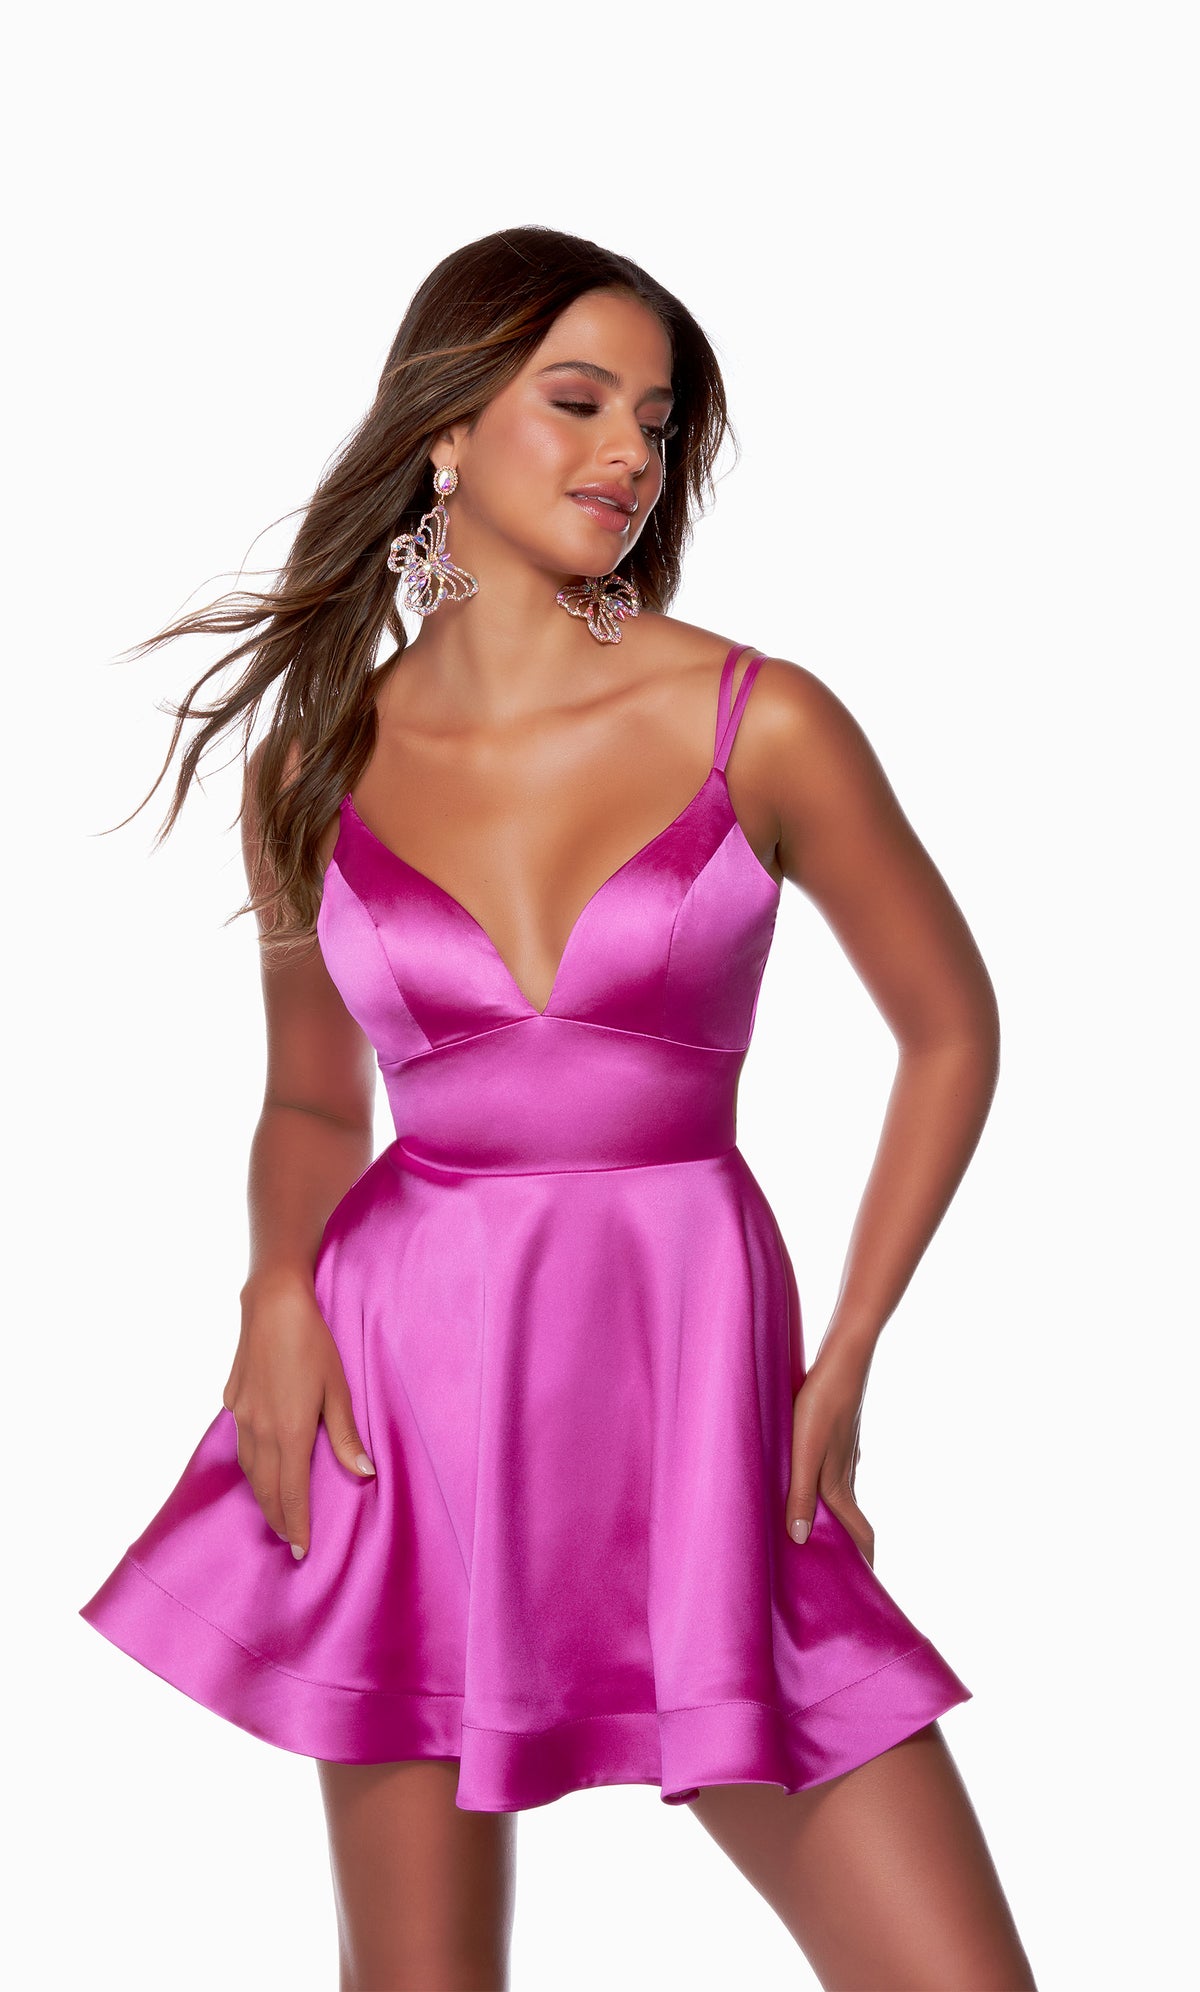 A V-neck, short satin homecoming dress with double spaghetti straps and a strappy, lace-up back in the color neon purple.